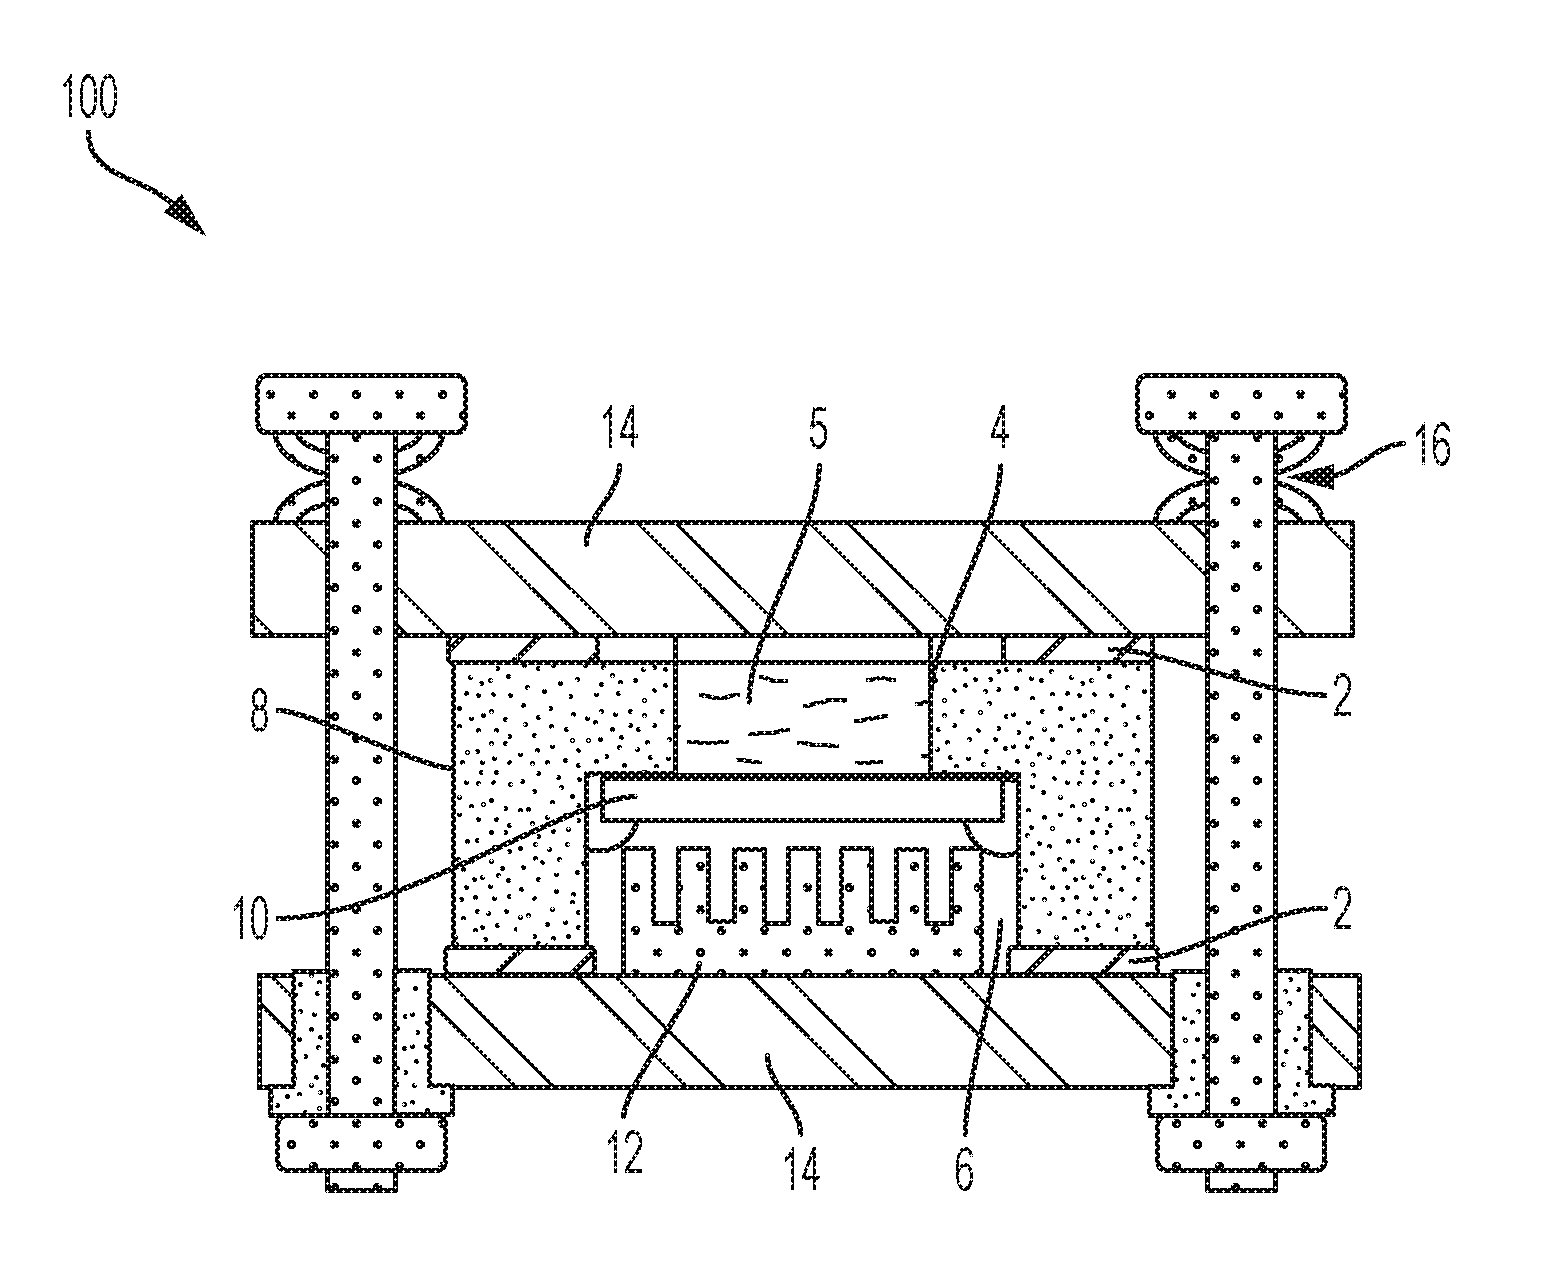 Sodium conducting energy storage devices comprising compliant polymer seals and methods for making and sealing same